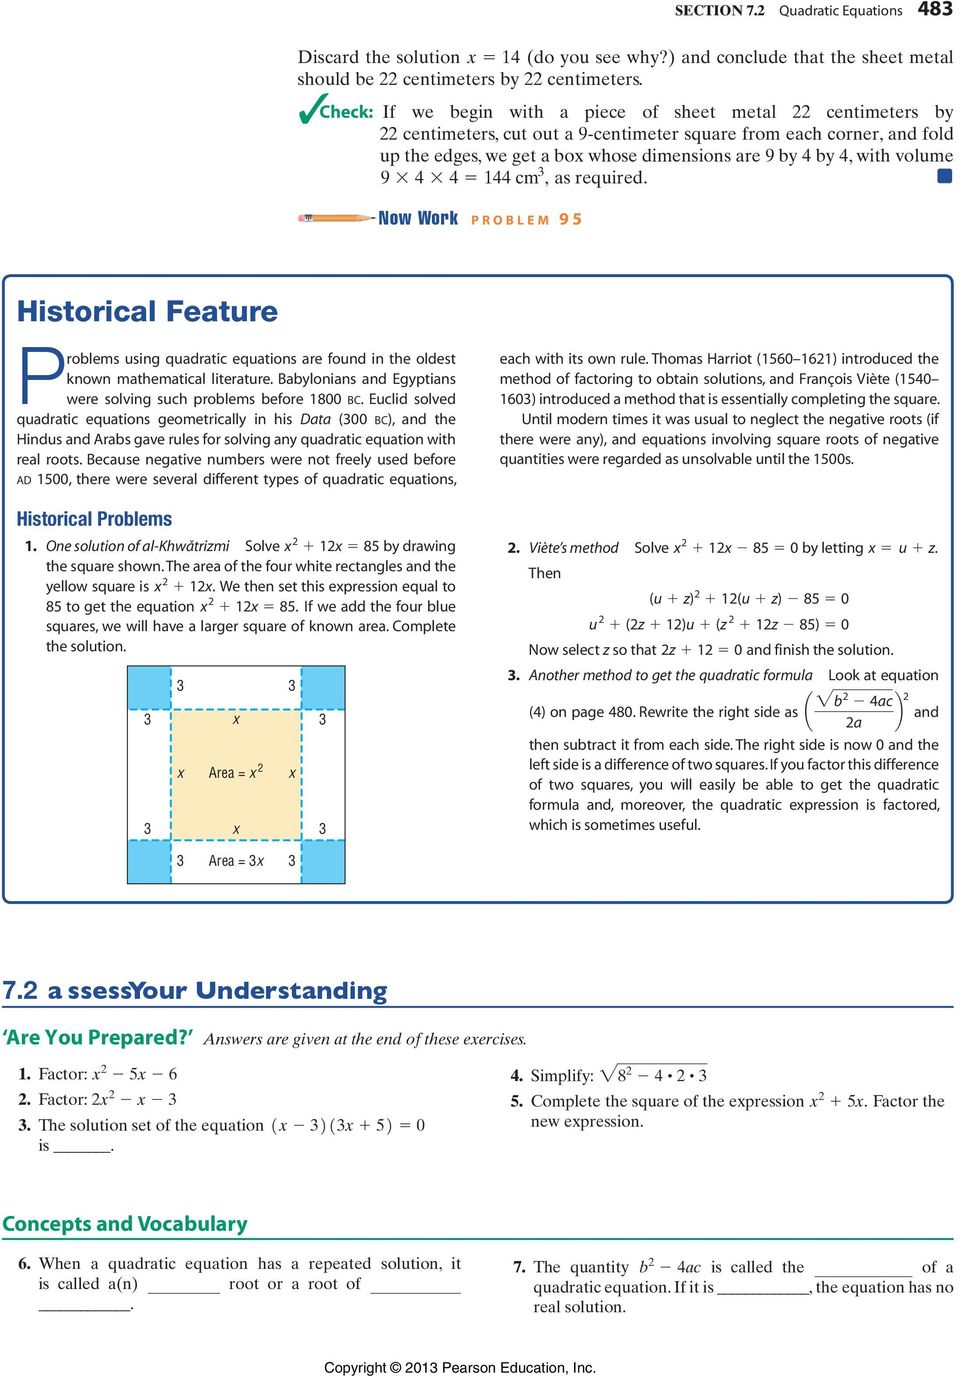 volume 9 * 4 * 4 = 144 cm, as required. Now Work p r o b l e m 9 5 Historical Feature Problems using quadratic equations are found in the oldest known mathematical literature.